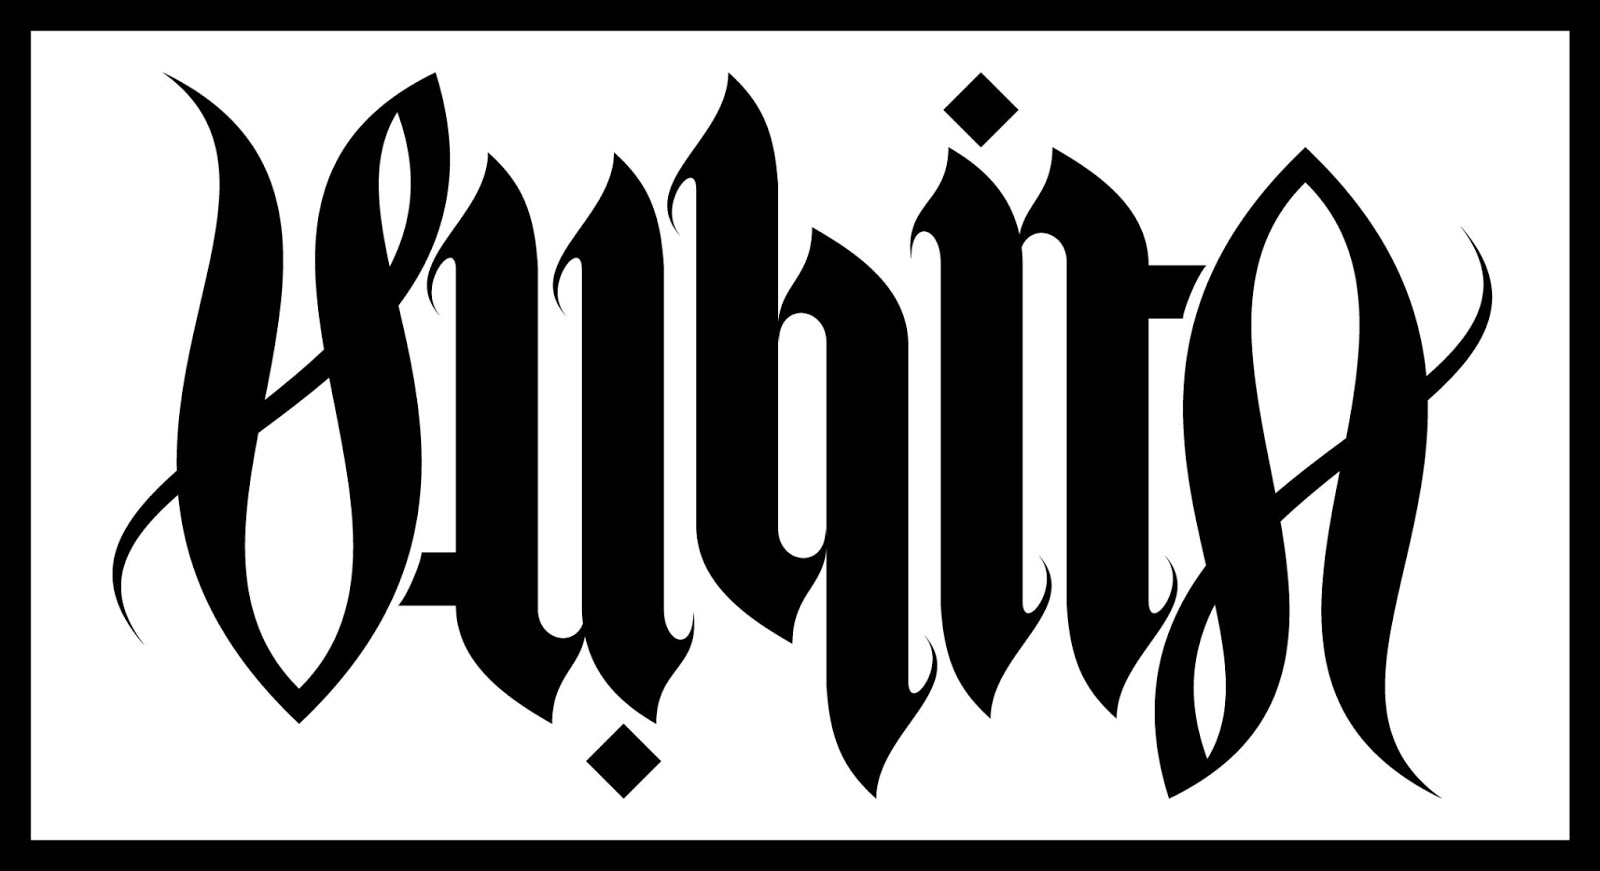 45 Ambigram Tattoos Designs & Meanings - For Men & Women (2019)